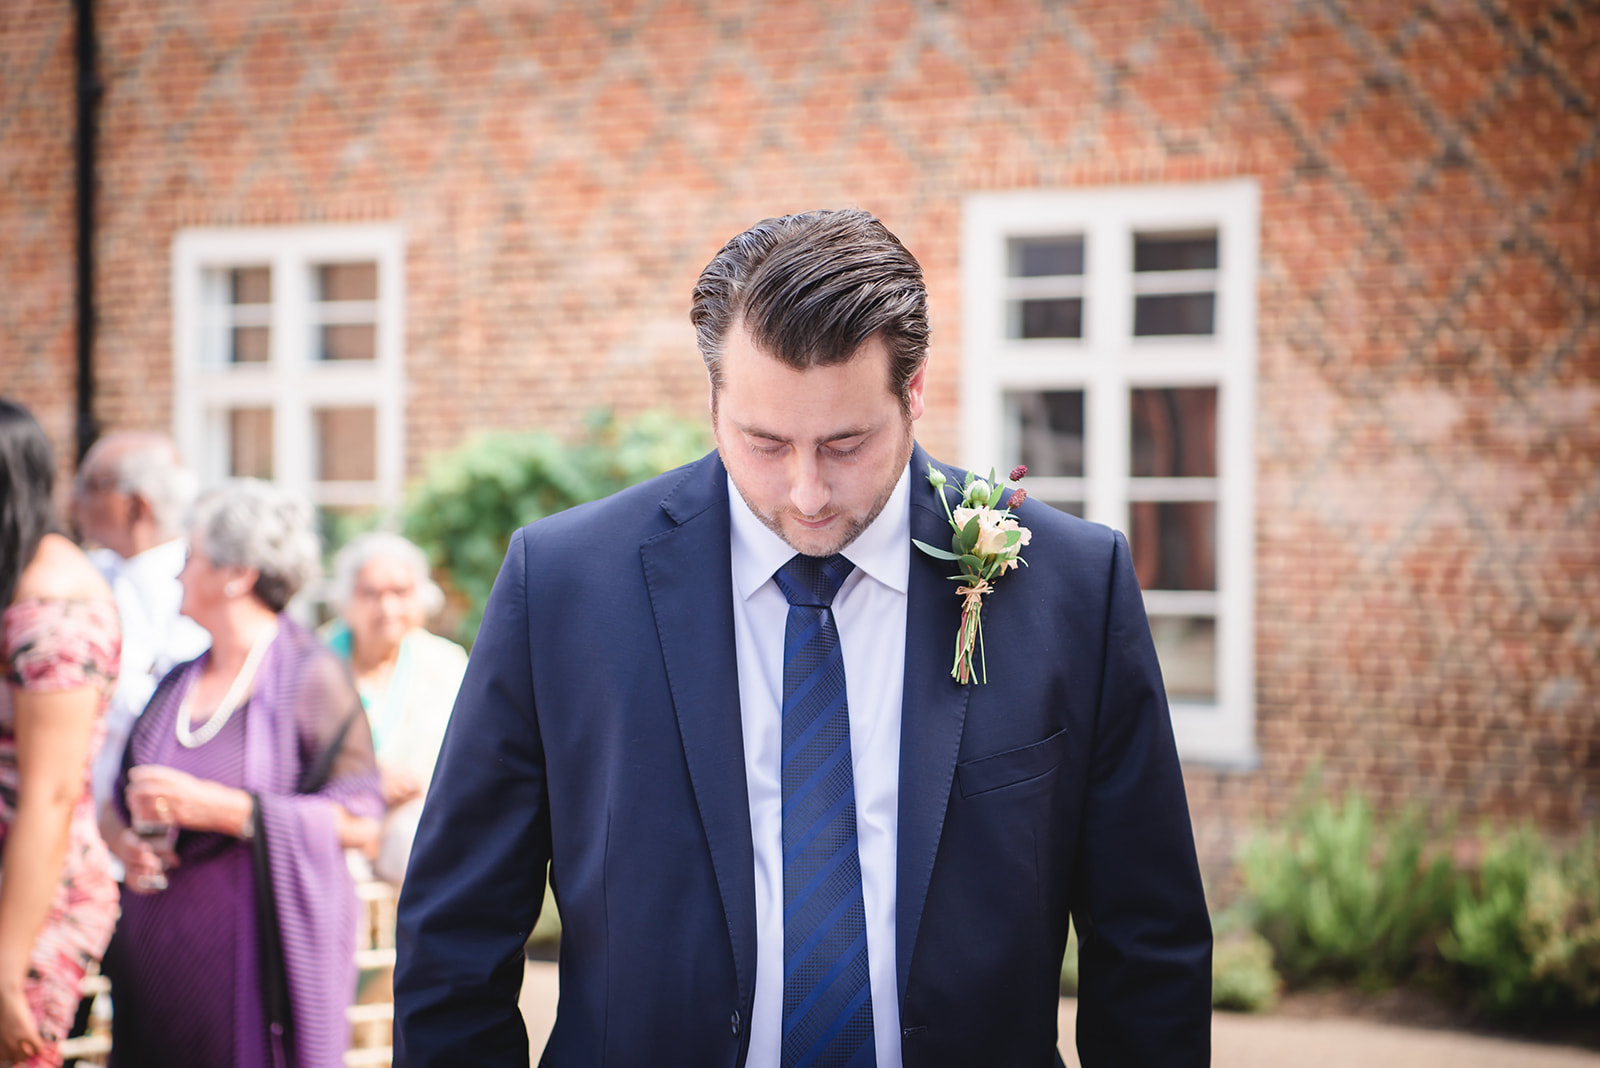 Chris waiting for the bride to enter wedding venue at the Fulham Palace